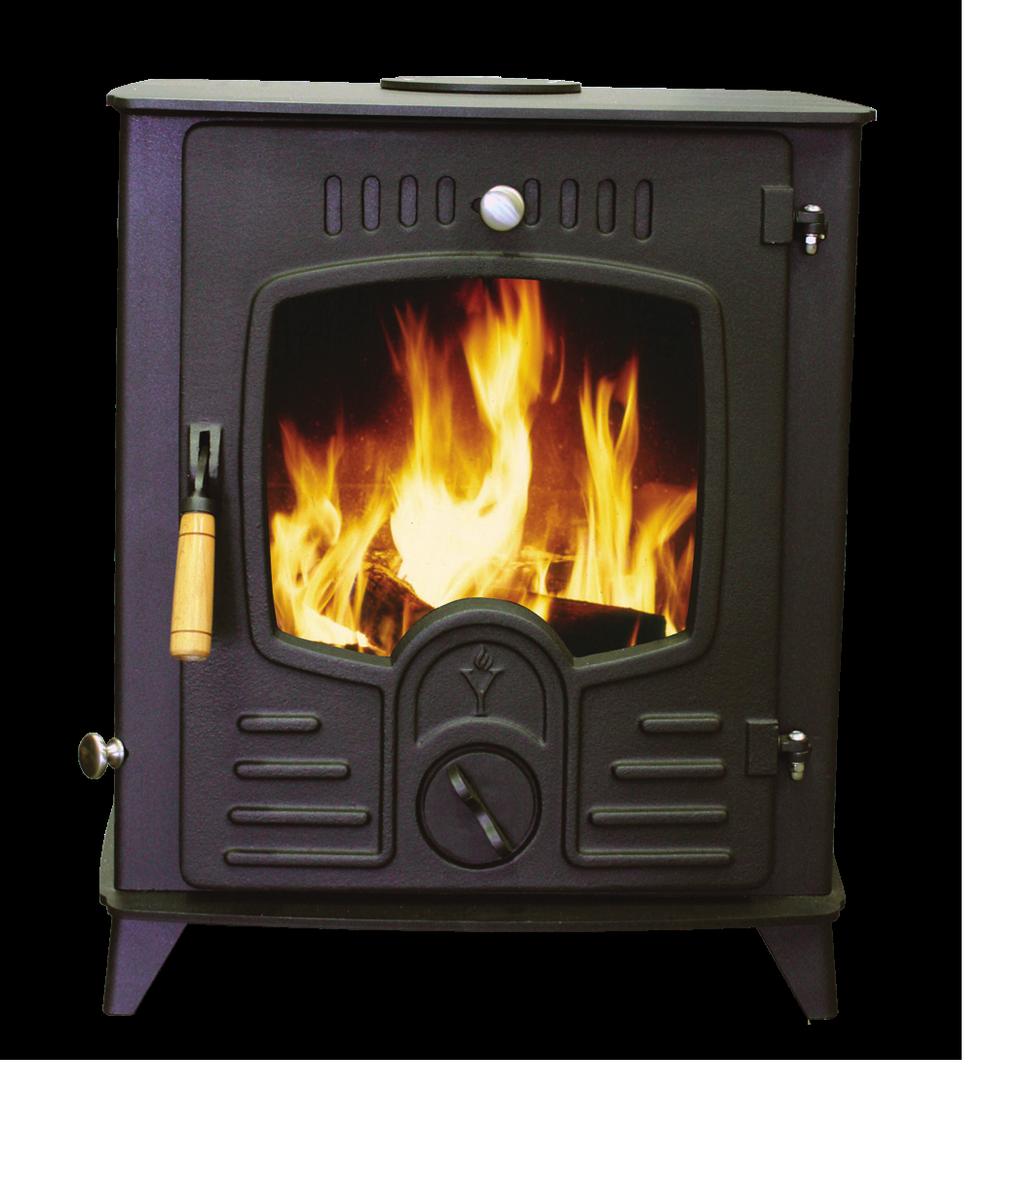 17kw Boiler Our 17kw Stove heats up to 12 radiators and is a great medium sized stove. Modern, sleek and economical, it is the perfect stove to heat a three bedroom house.